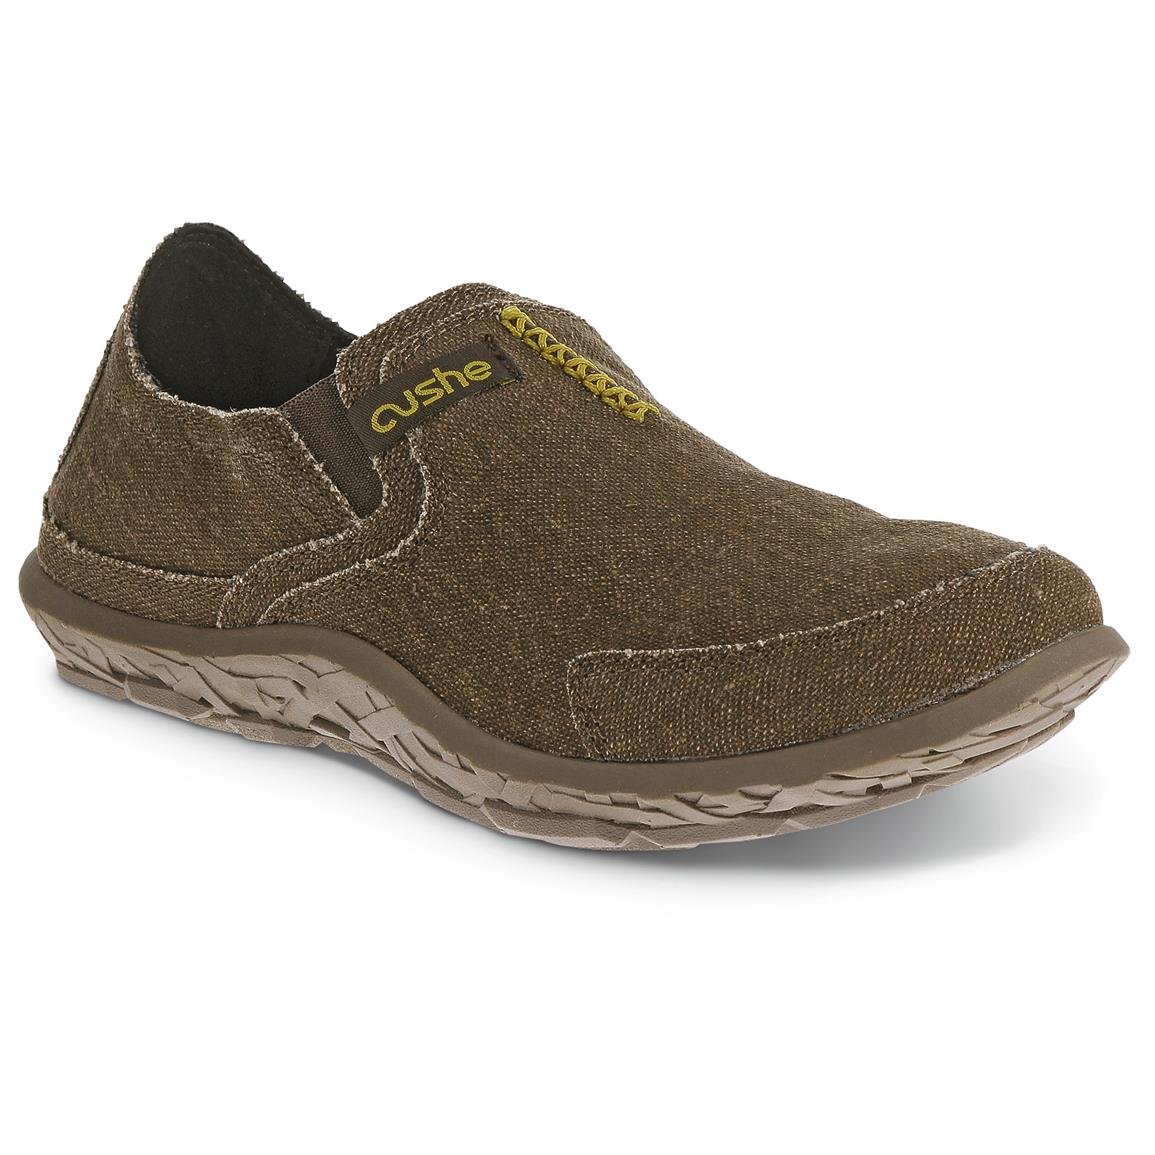 Cushe Slippers Slip-on Shoes - 653989, Casual Shoes at Sportsman's Guide